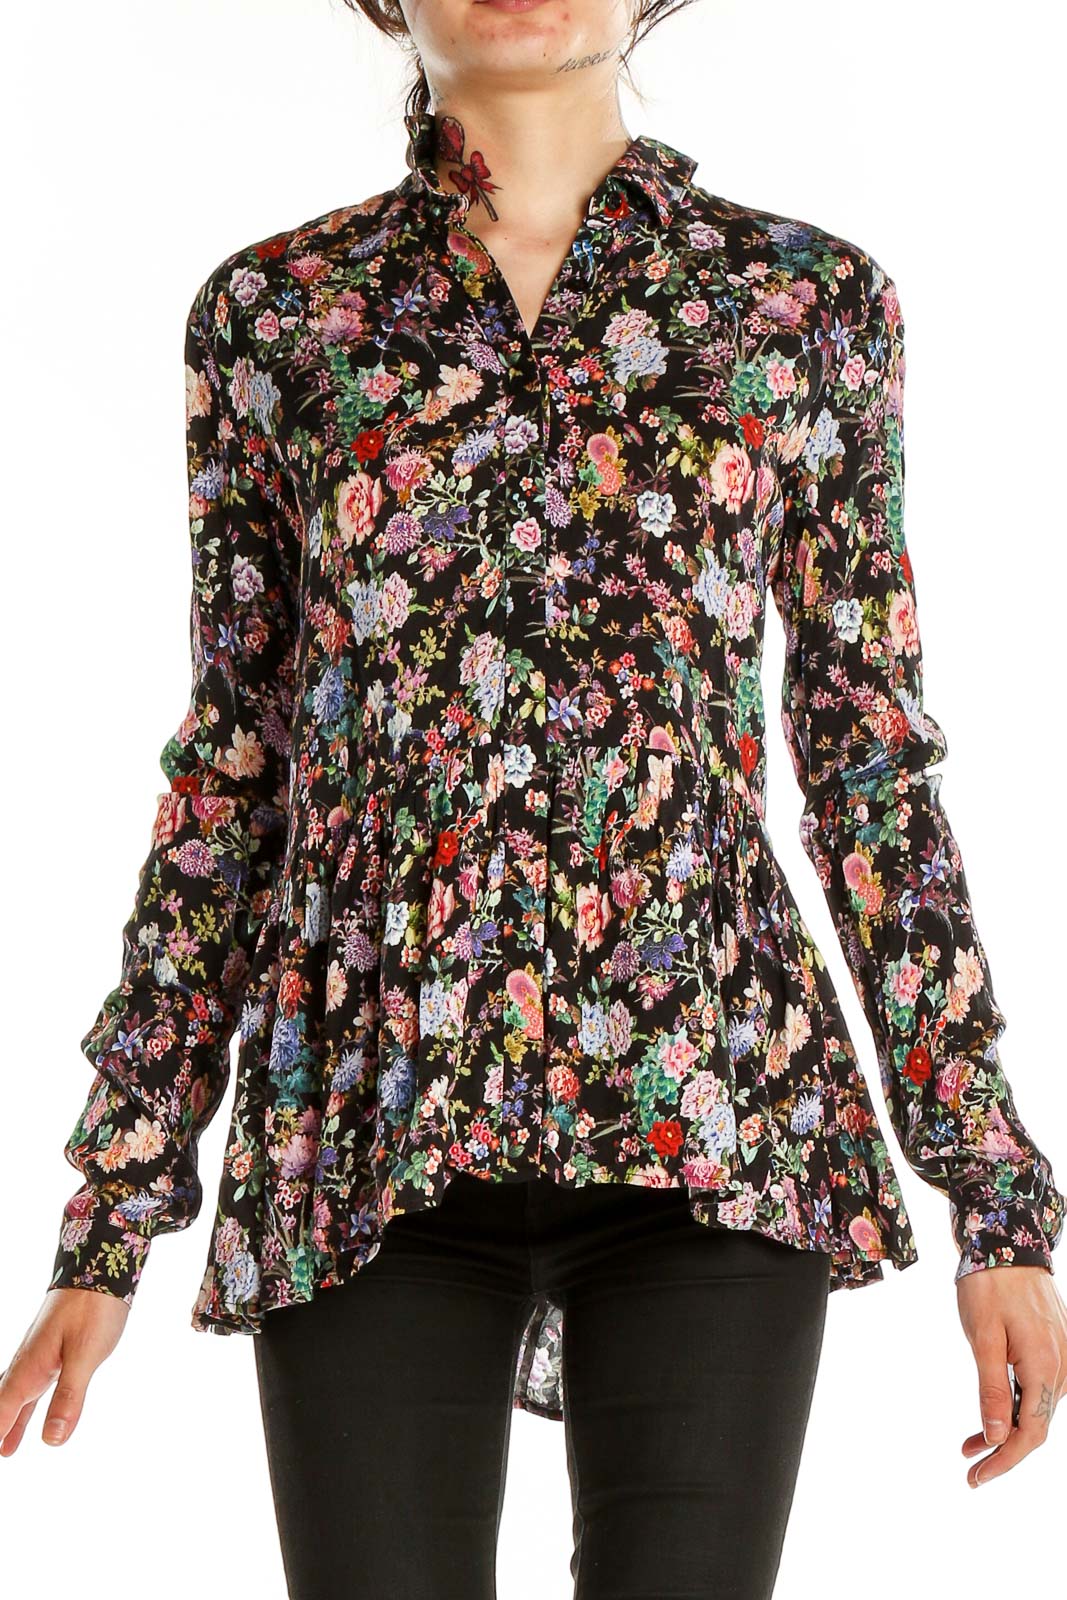 Black Floral Print Pleated Top Front